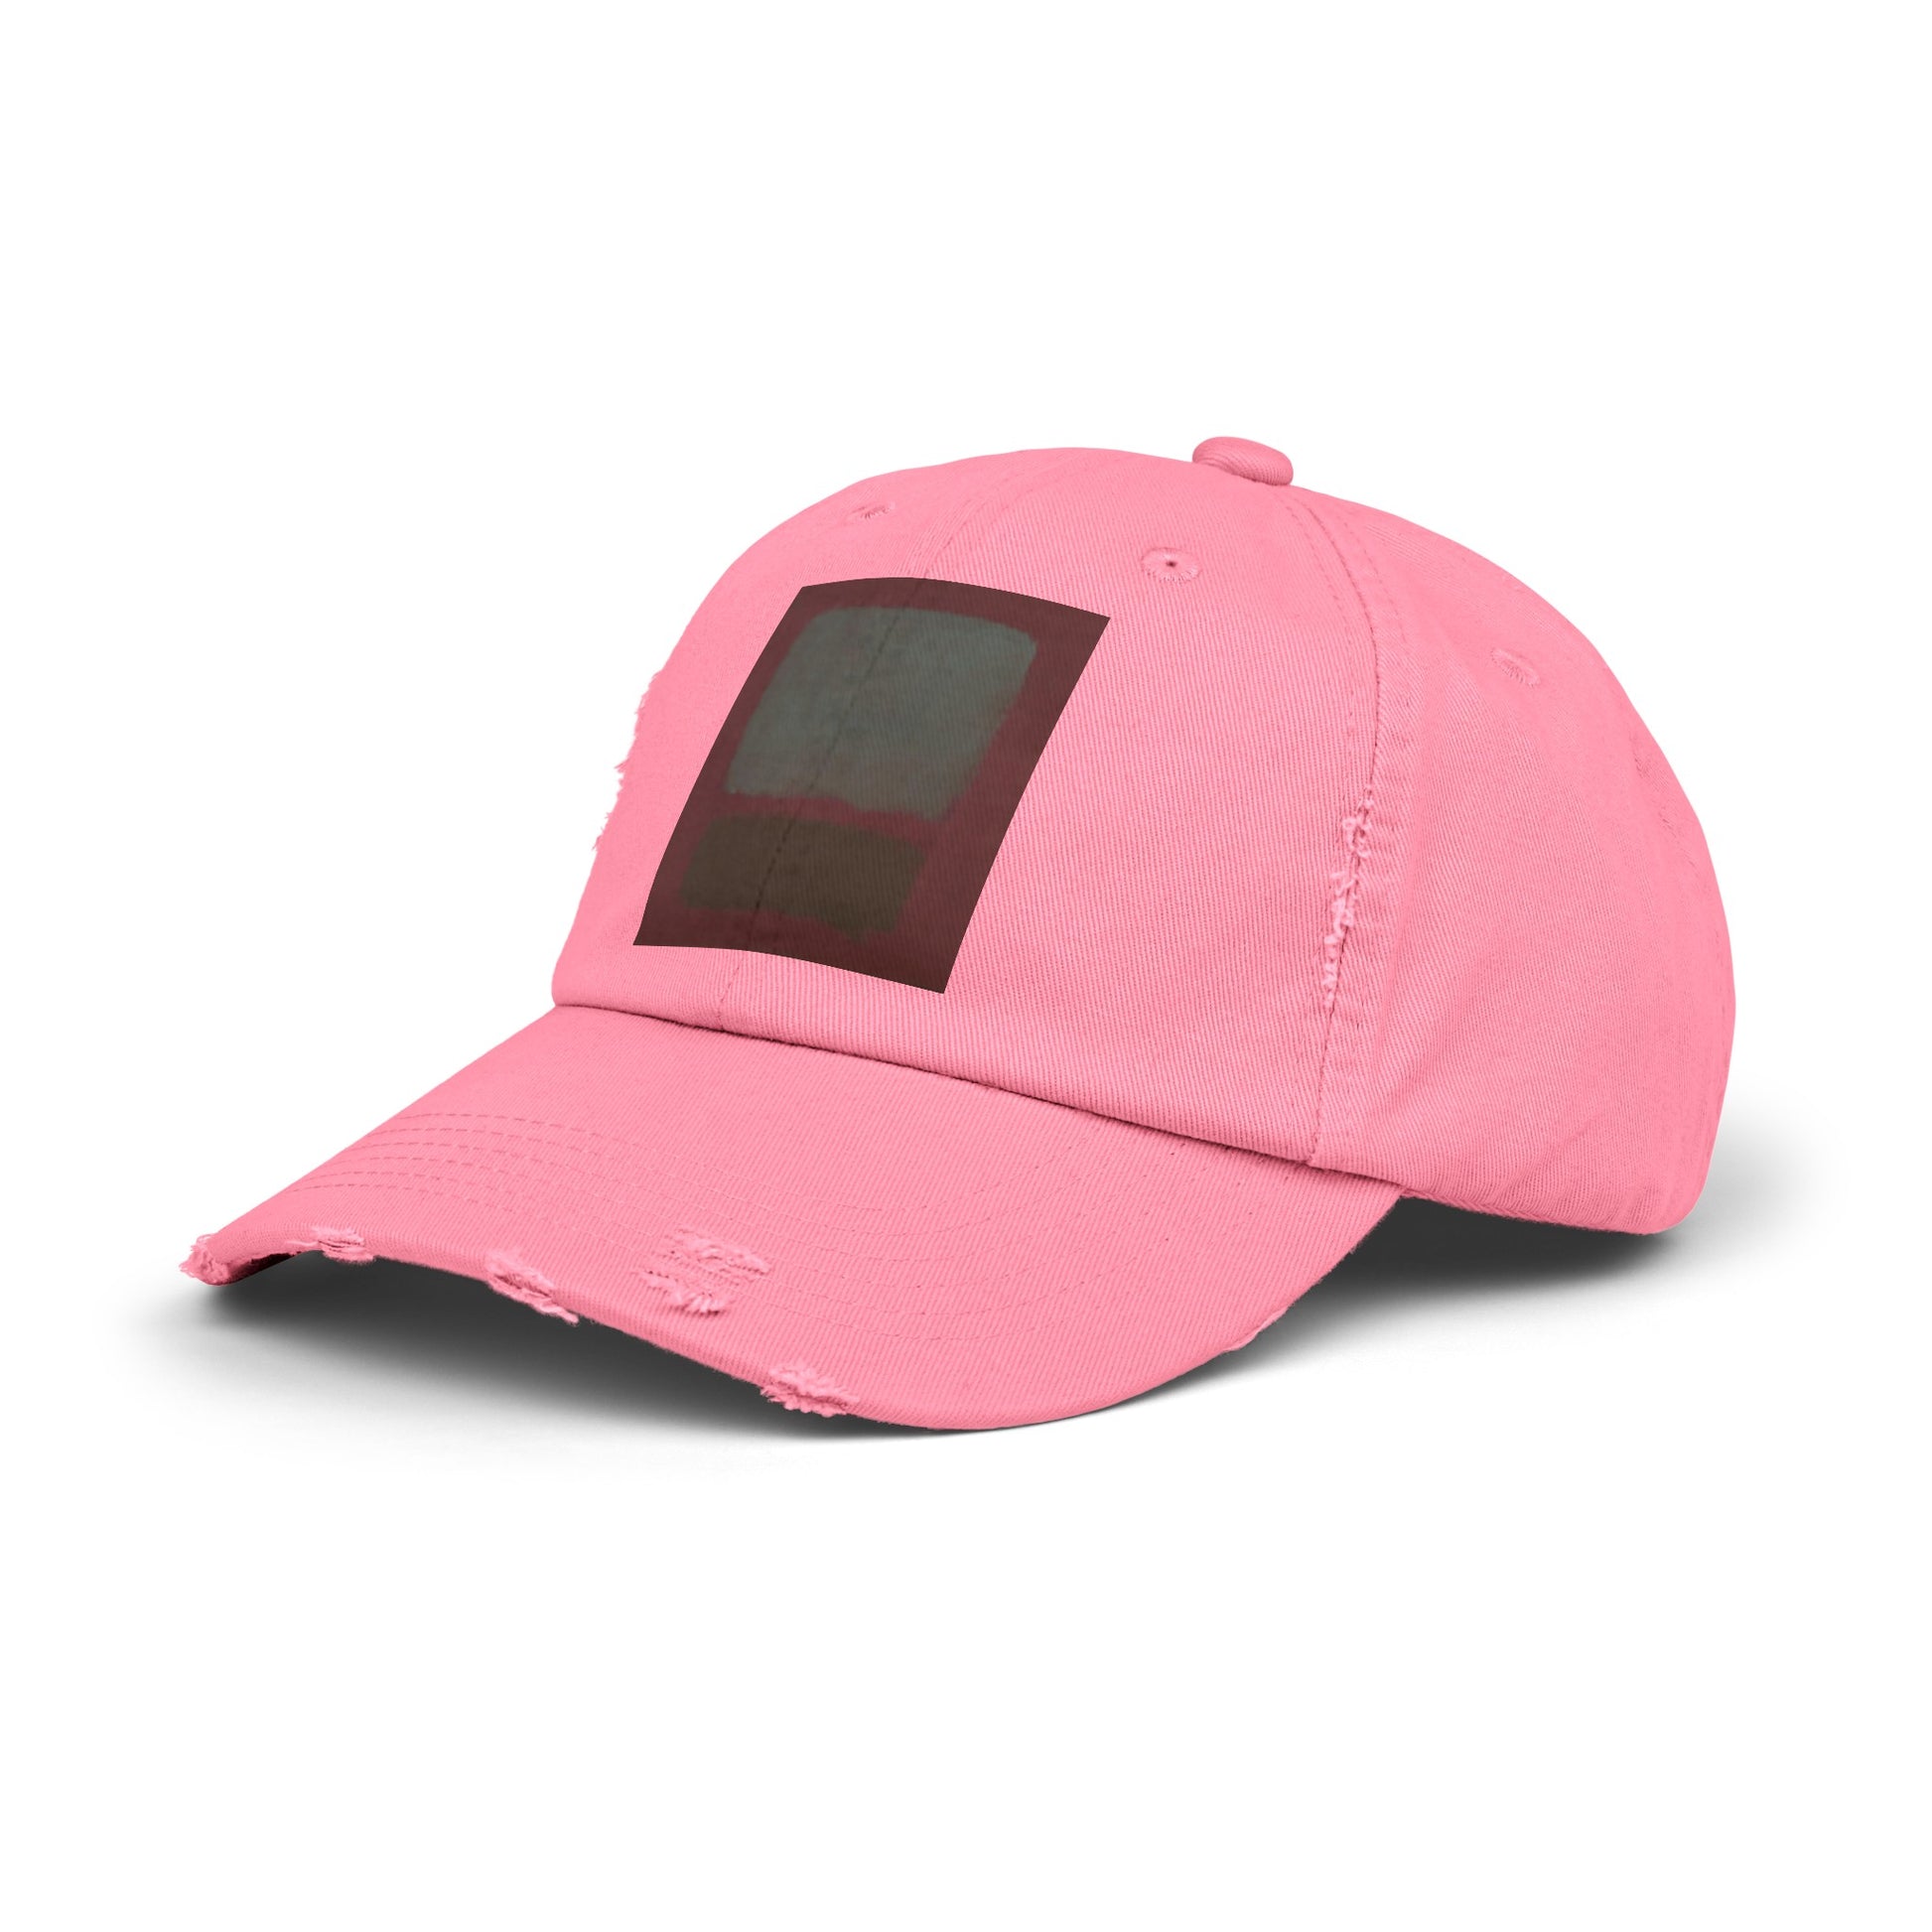 a pink hat with a black patch on the front of it